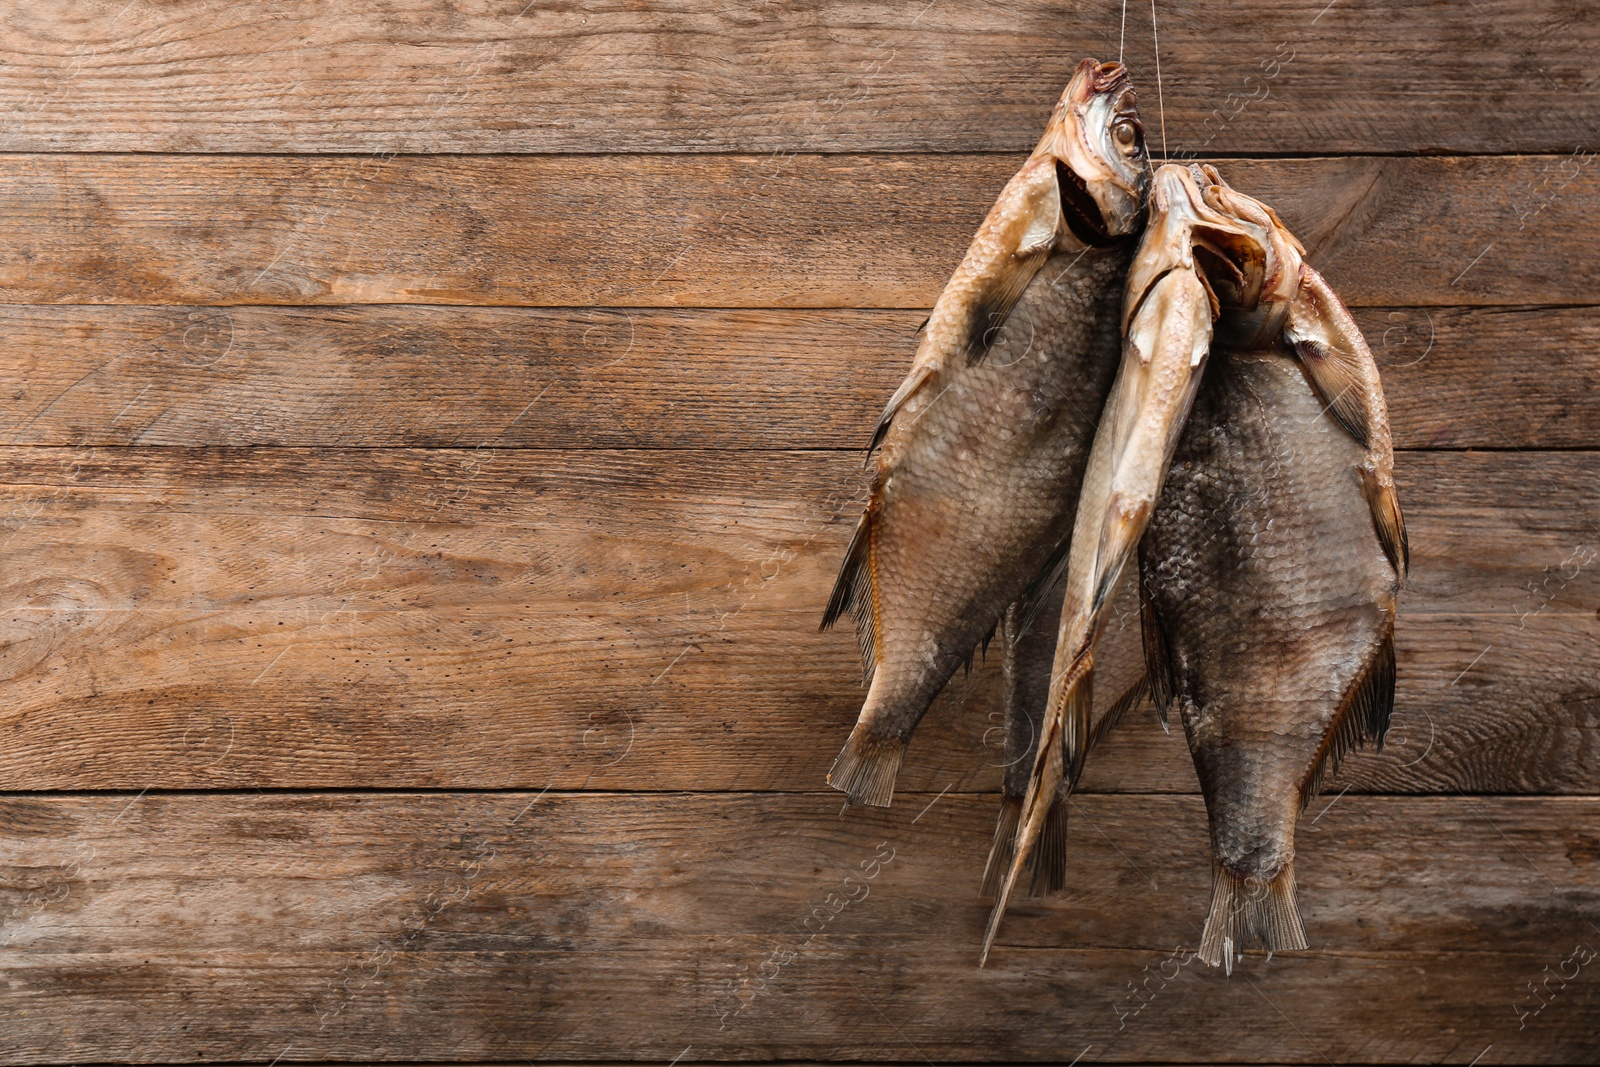 Photo of Dried fish hanging on rope against wooden background, space for text